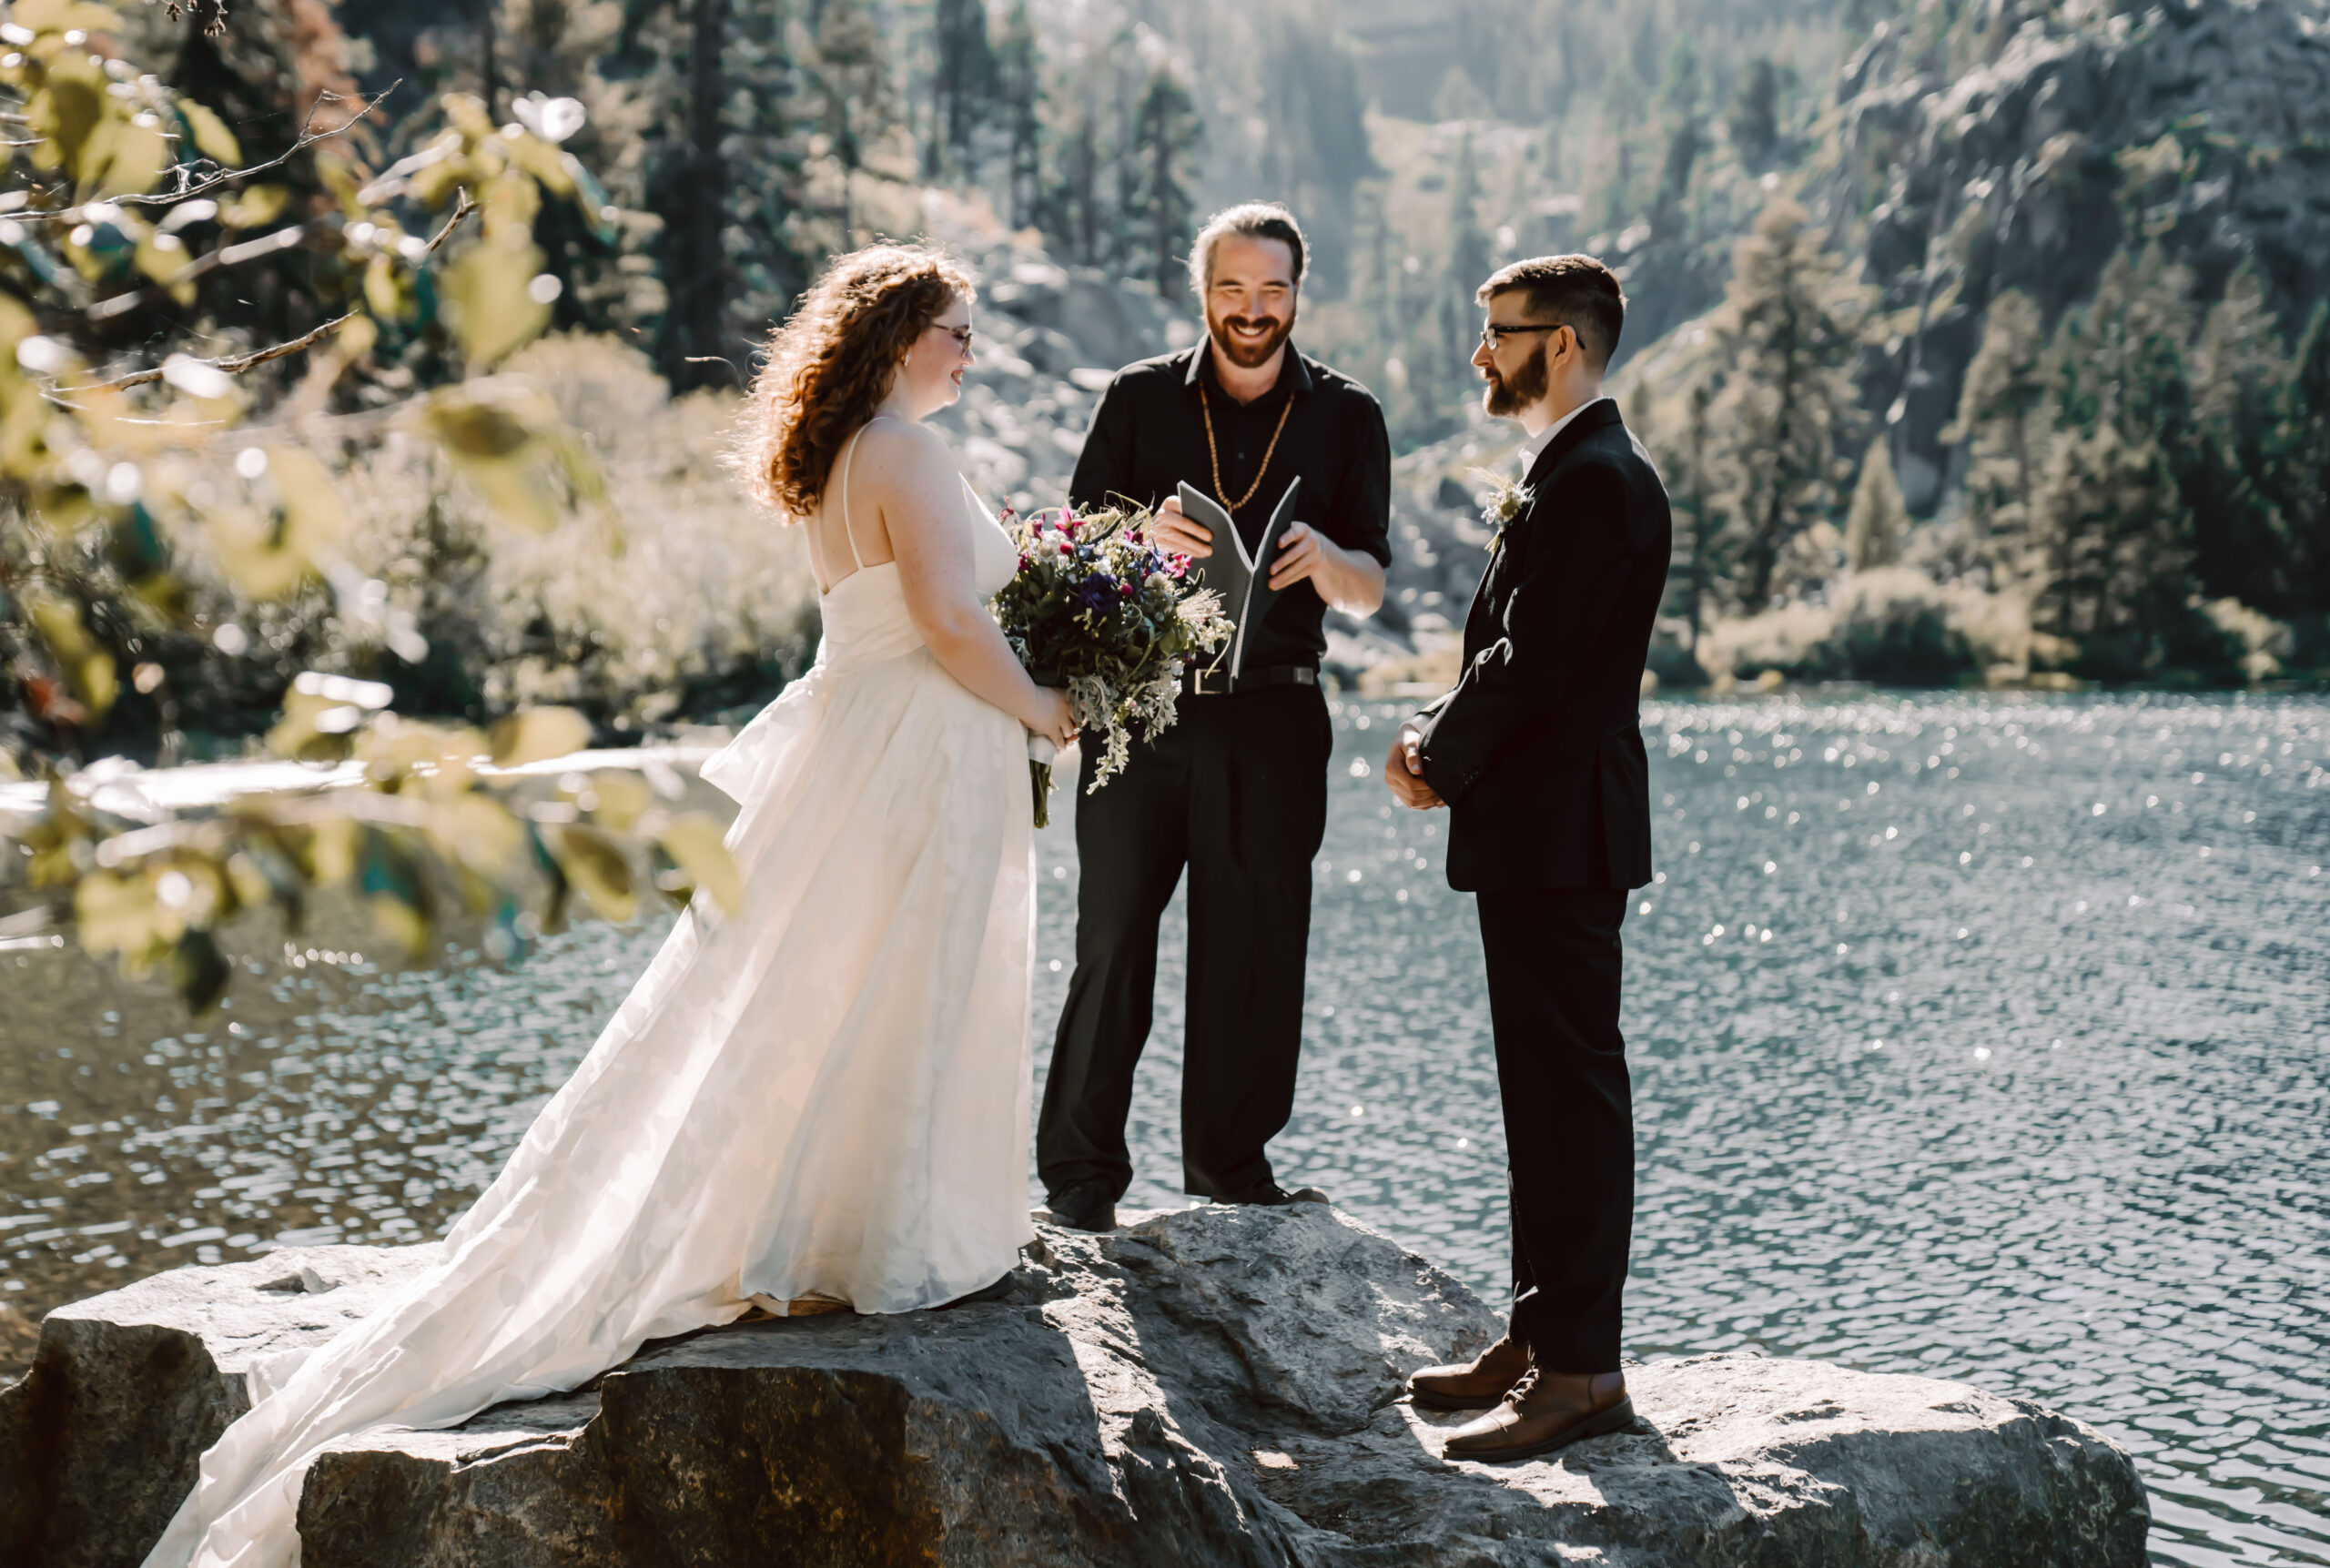 A bride and groom standing on a rock overlooking a lake for their elopement ceremony in California